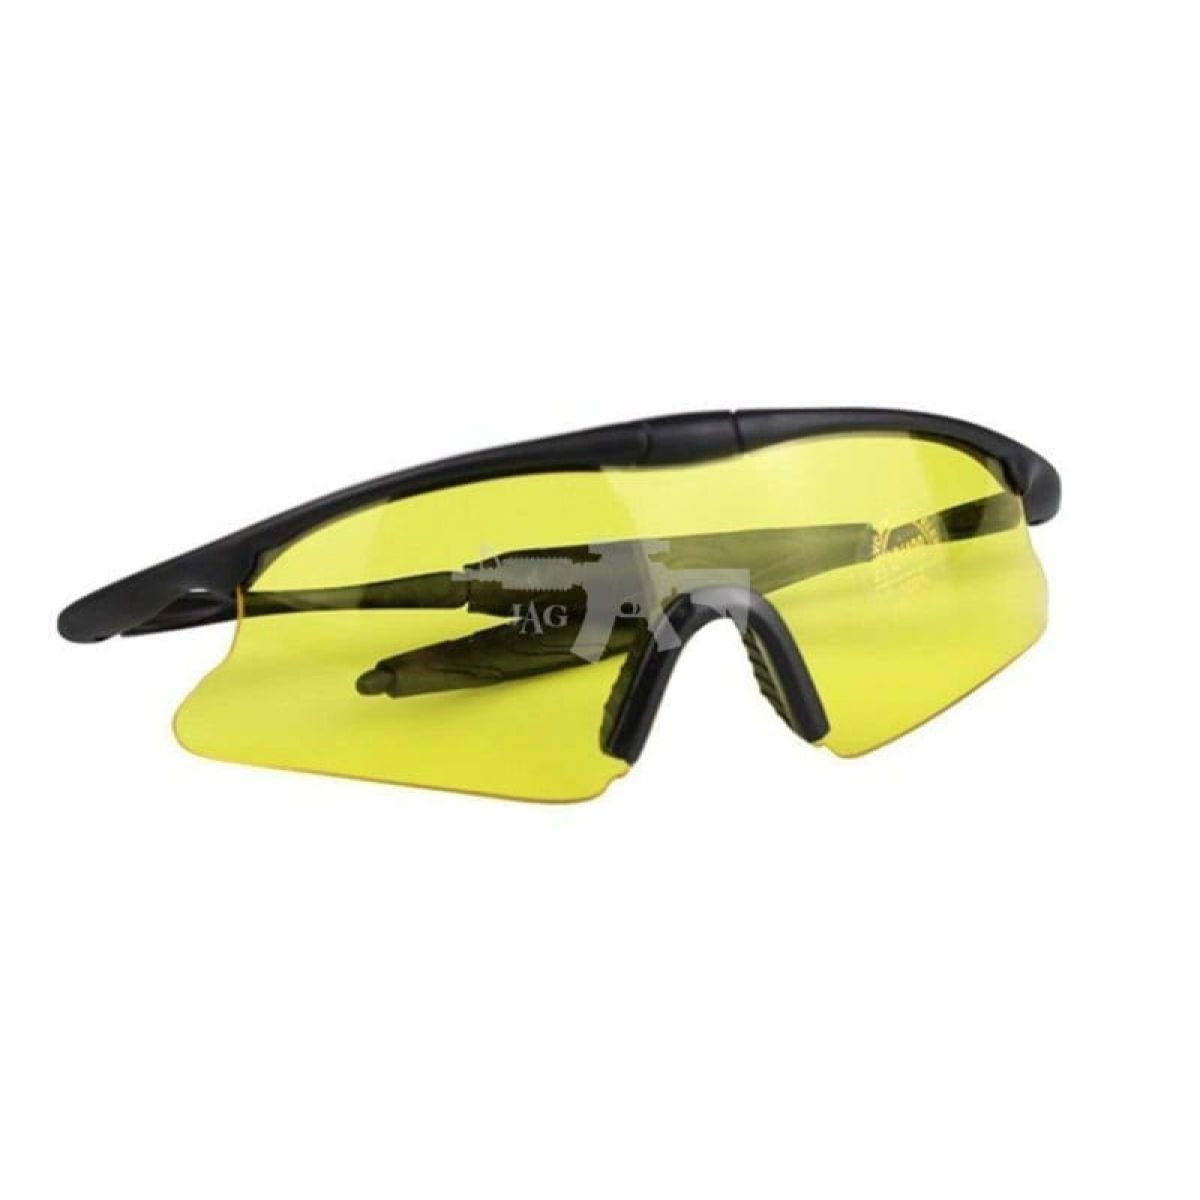 Clay Airsoft Shooting Safety Glasses Low Light Yellow Shatterproof Lenses EN166F 